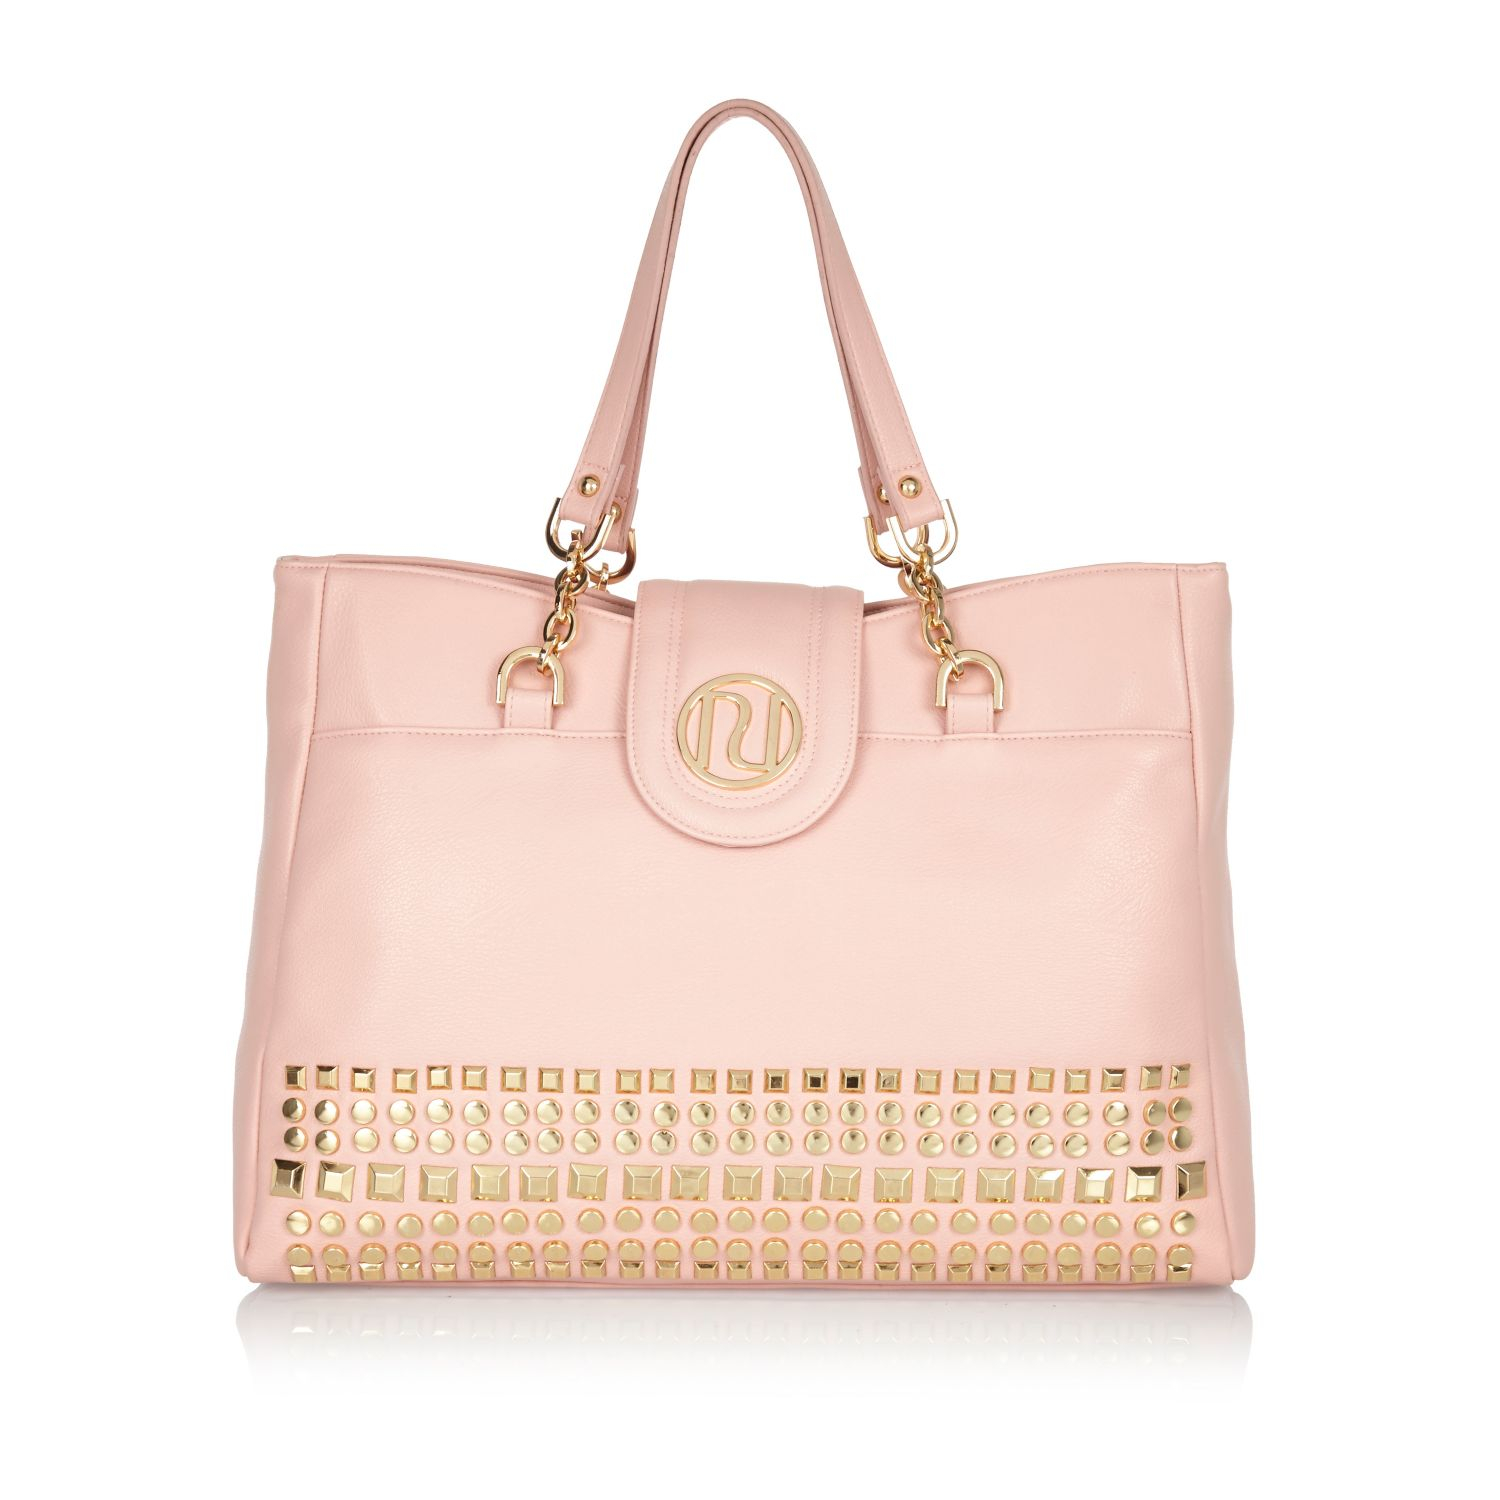 River Island Light Pink Studded Tote Bag in Pink | Lyst